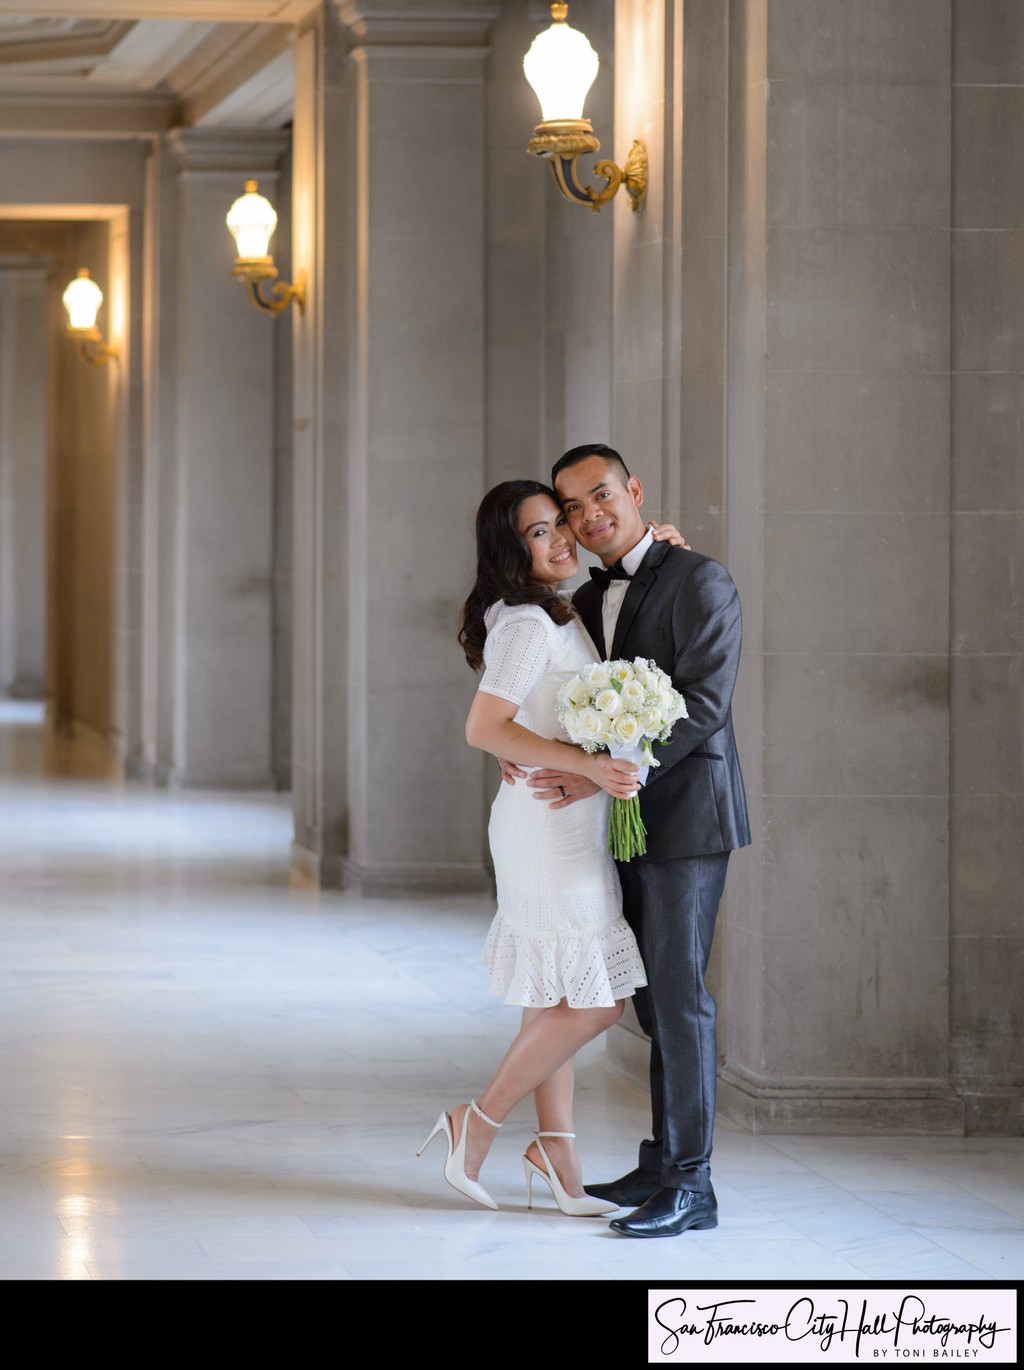 Cute Bride and Groom Elopement Photography on 3rd floor City Hall